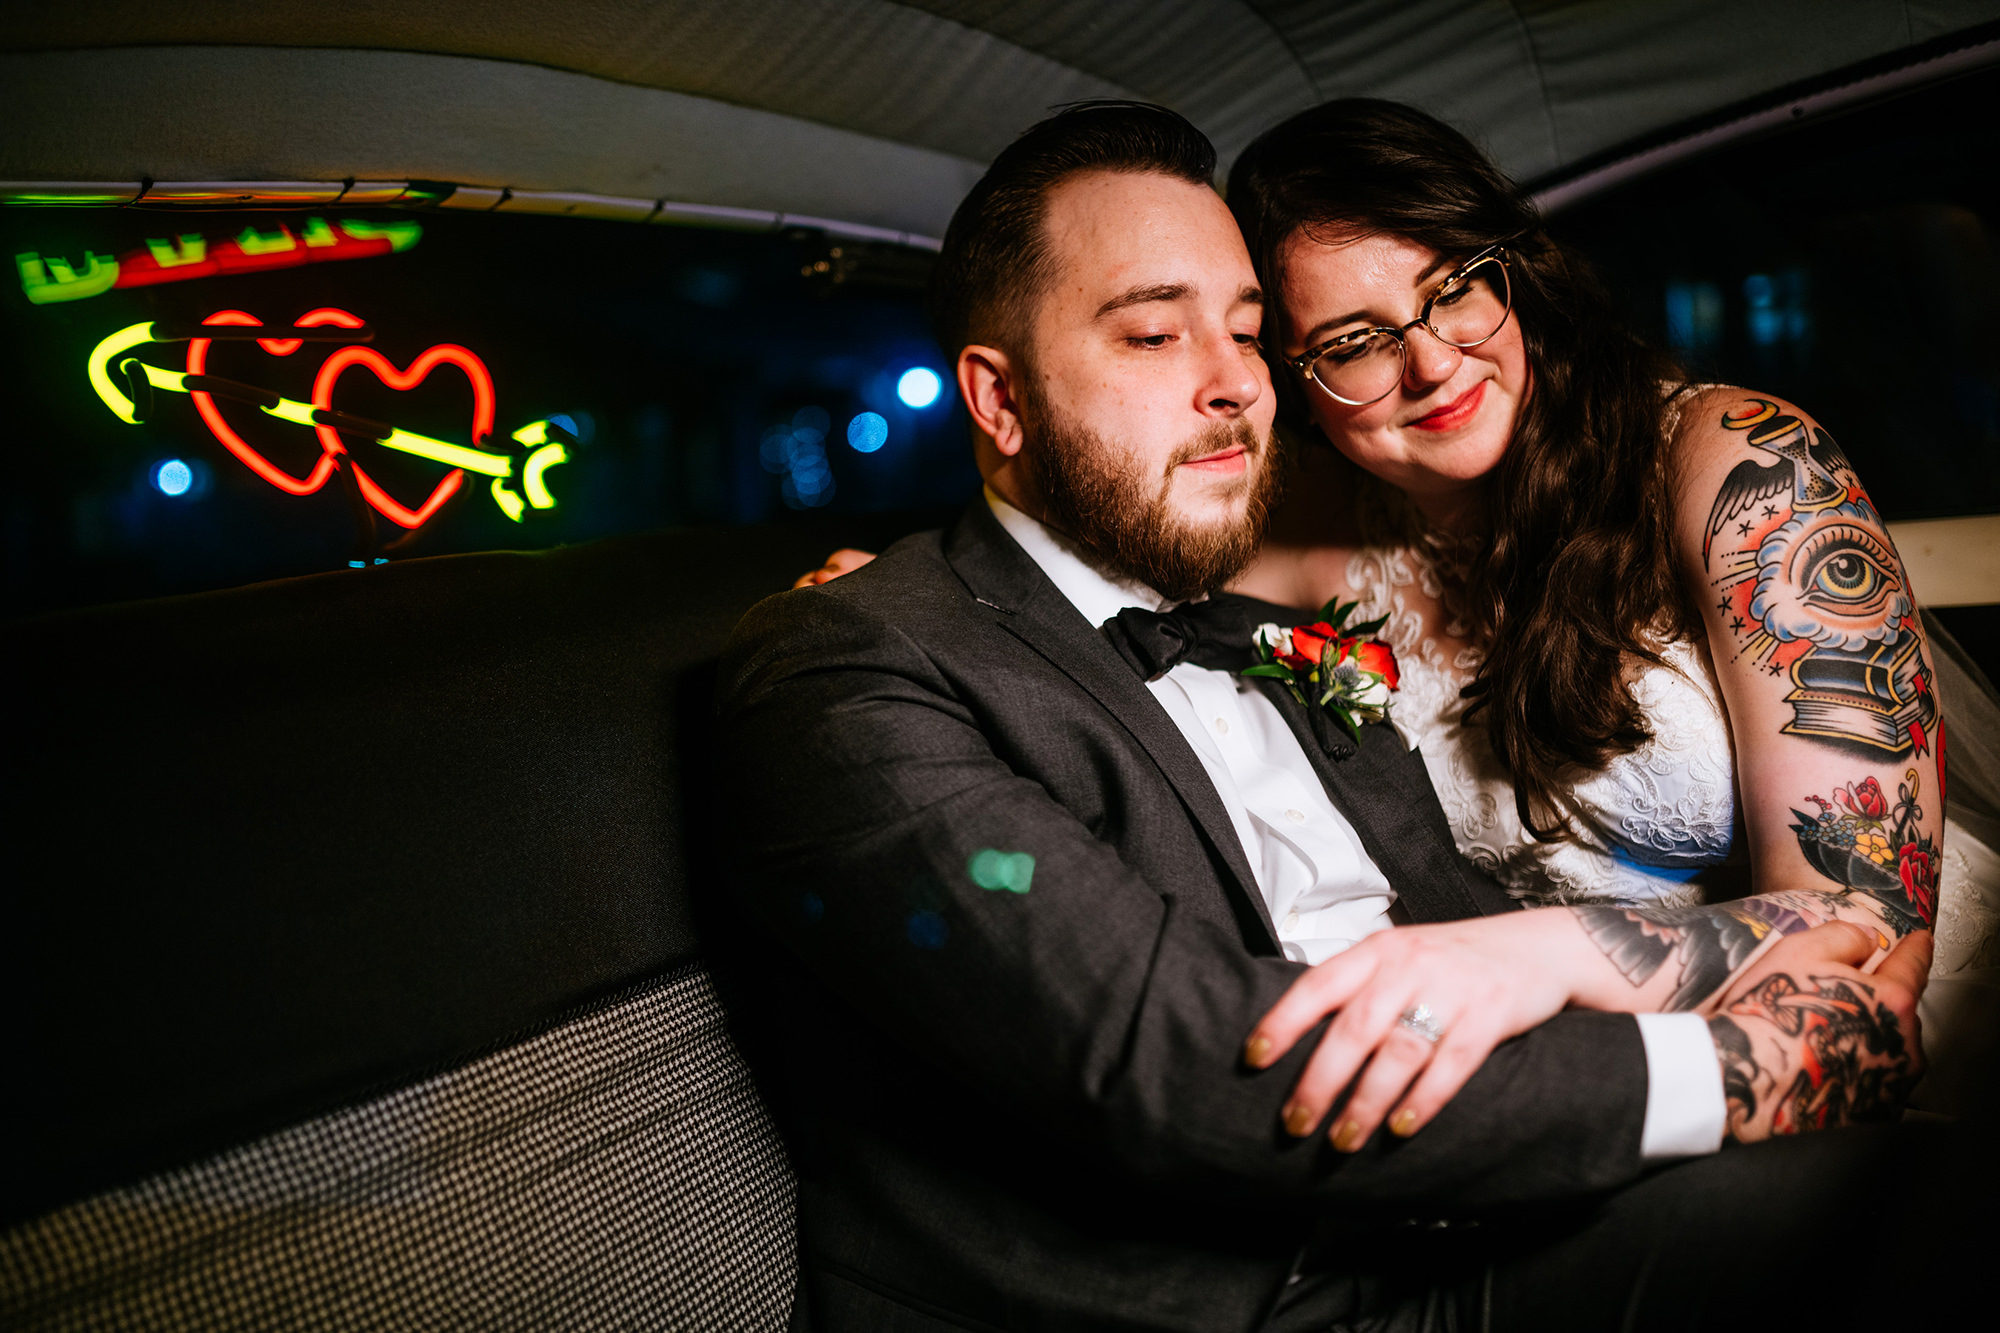 bride and groom portrait in car